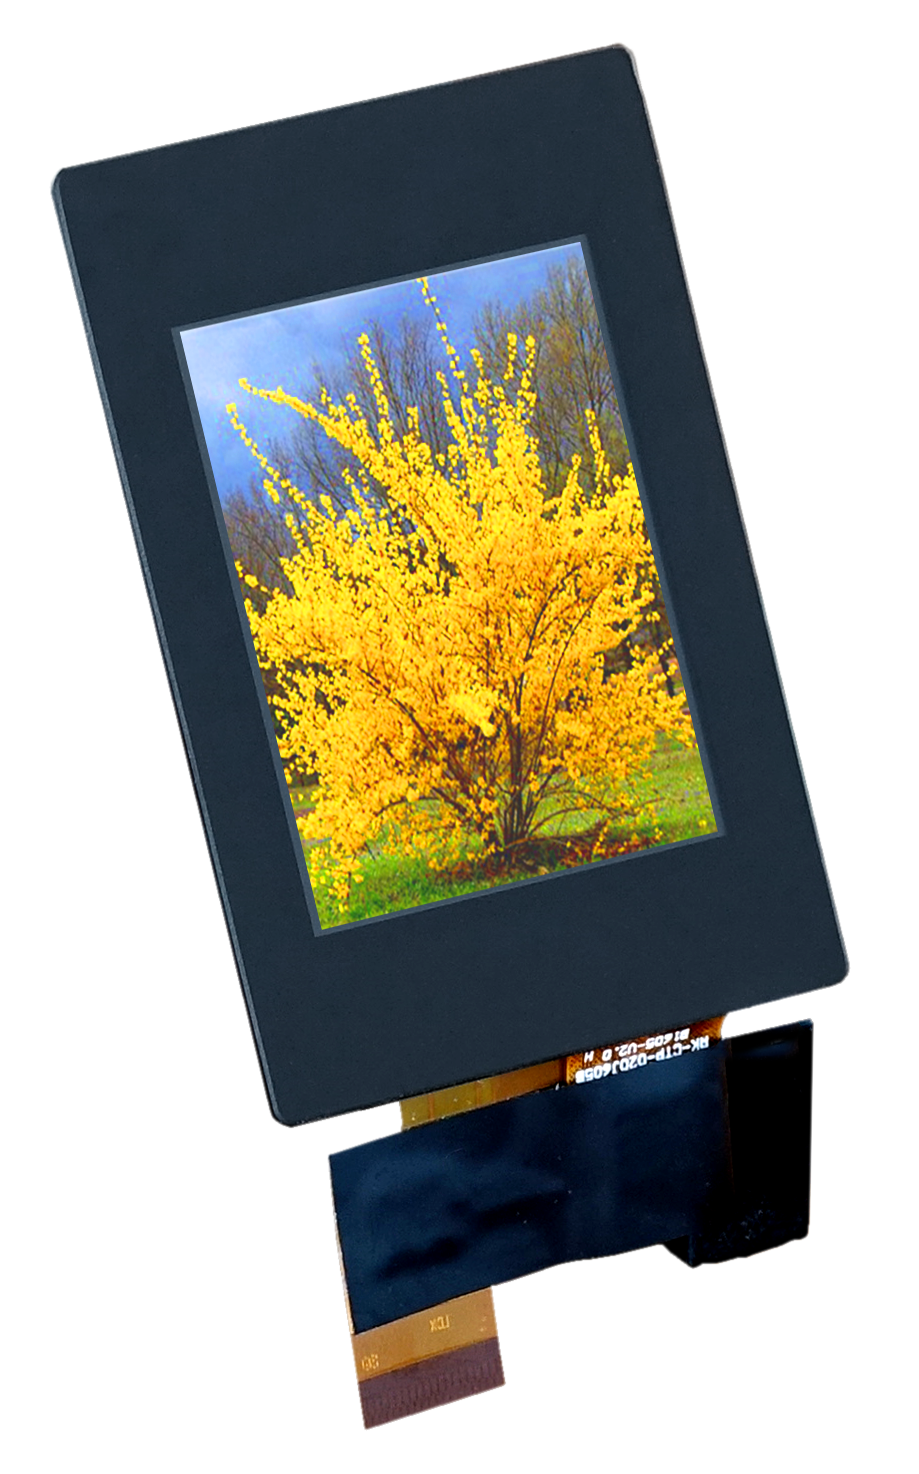 2.0" 320x240 EA TFT020-23AITC TFT-IPS Graphic Display with PCAP touch screen